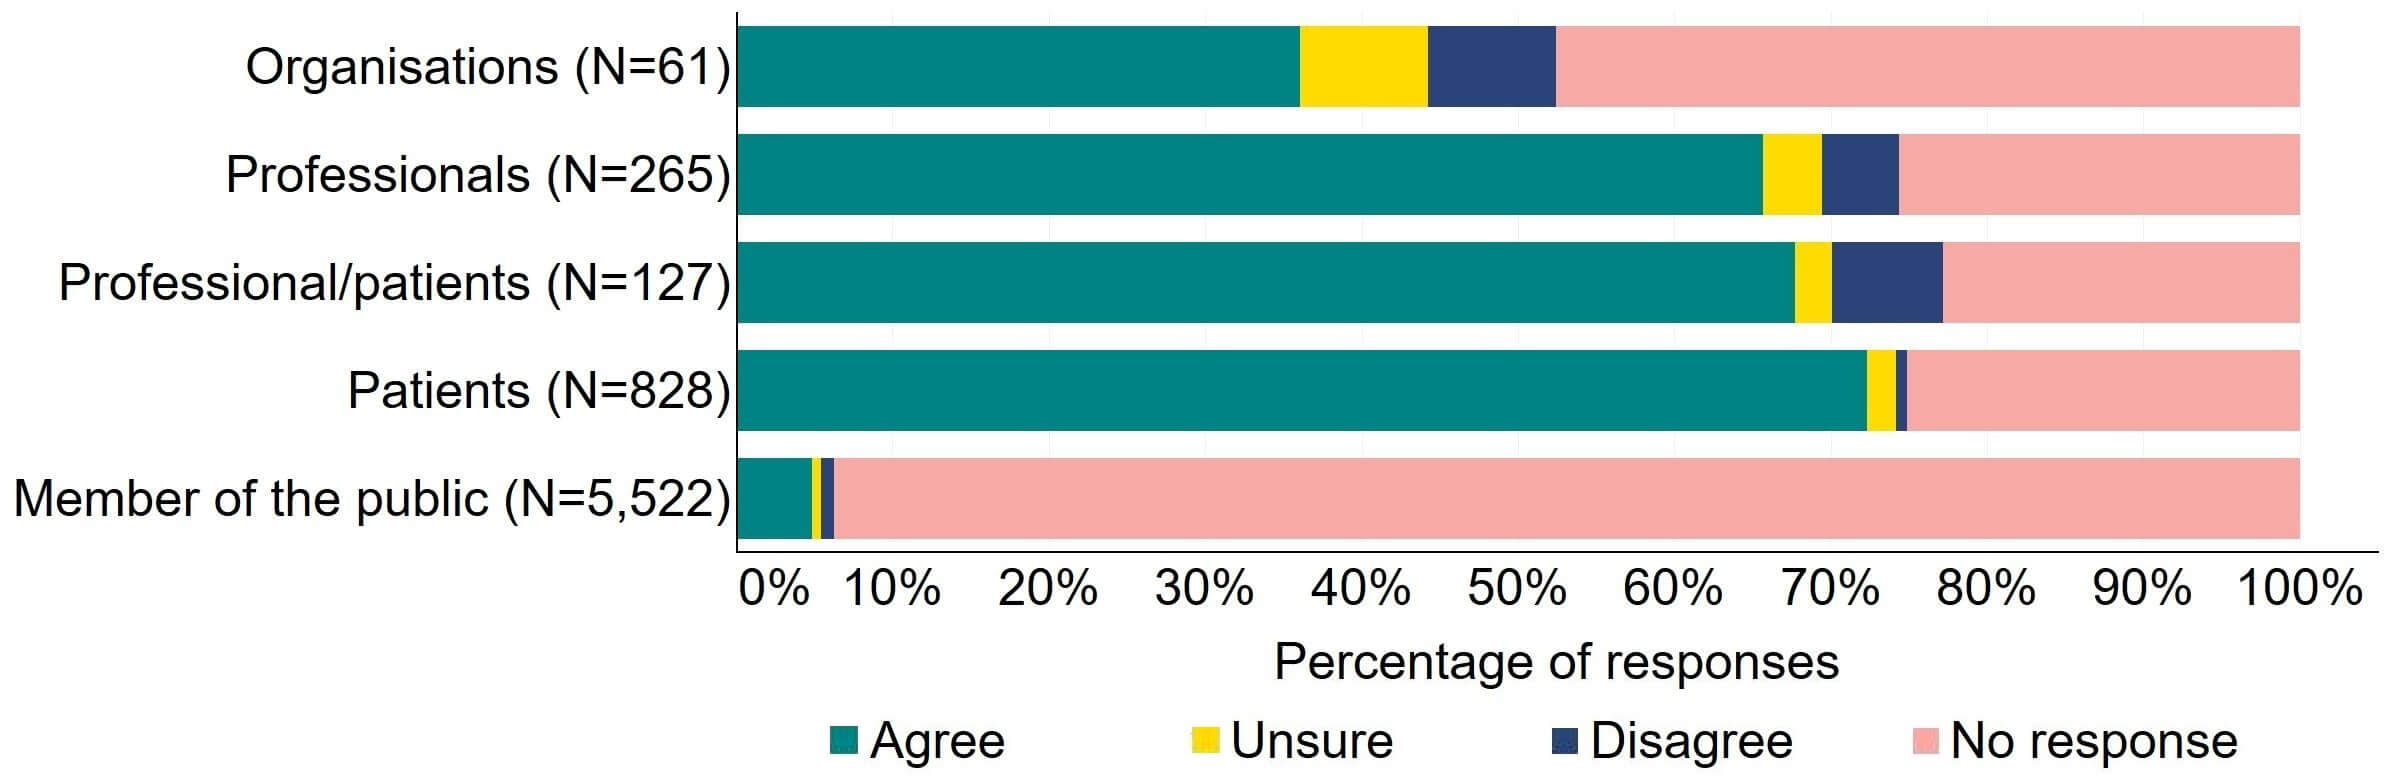 Figure 5 is a stacked bar chart showing the proportion of respondents in each response group who agreed, disagreed, were unsure, or who did not provide a response to the proposal. The underlying data can be downloaded as an Excel worksheet at the top of the page.